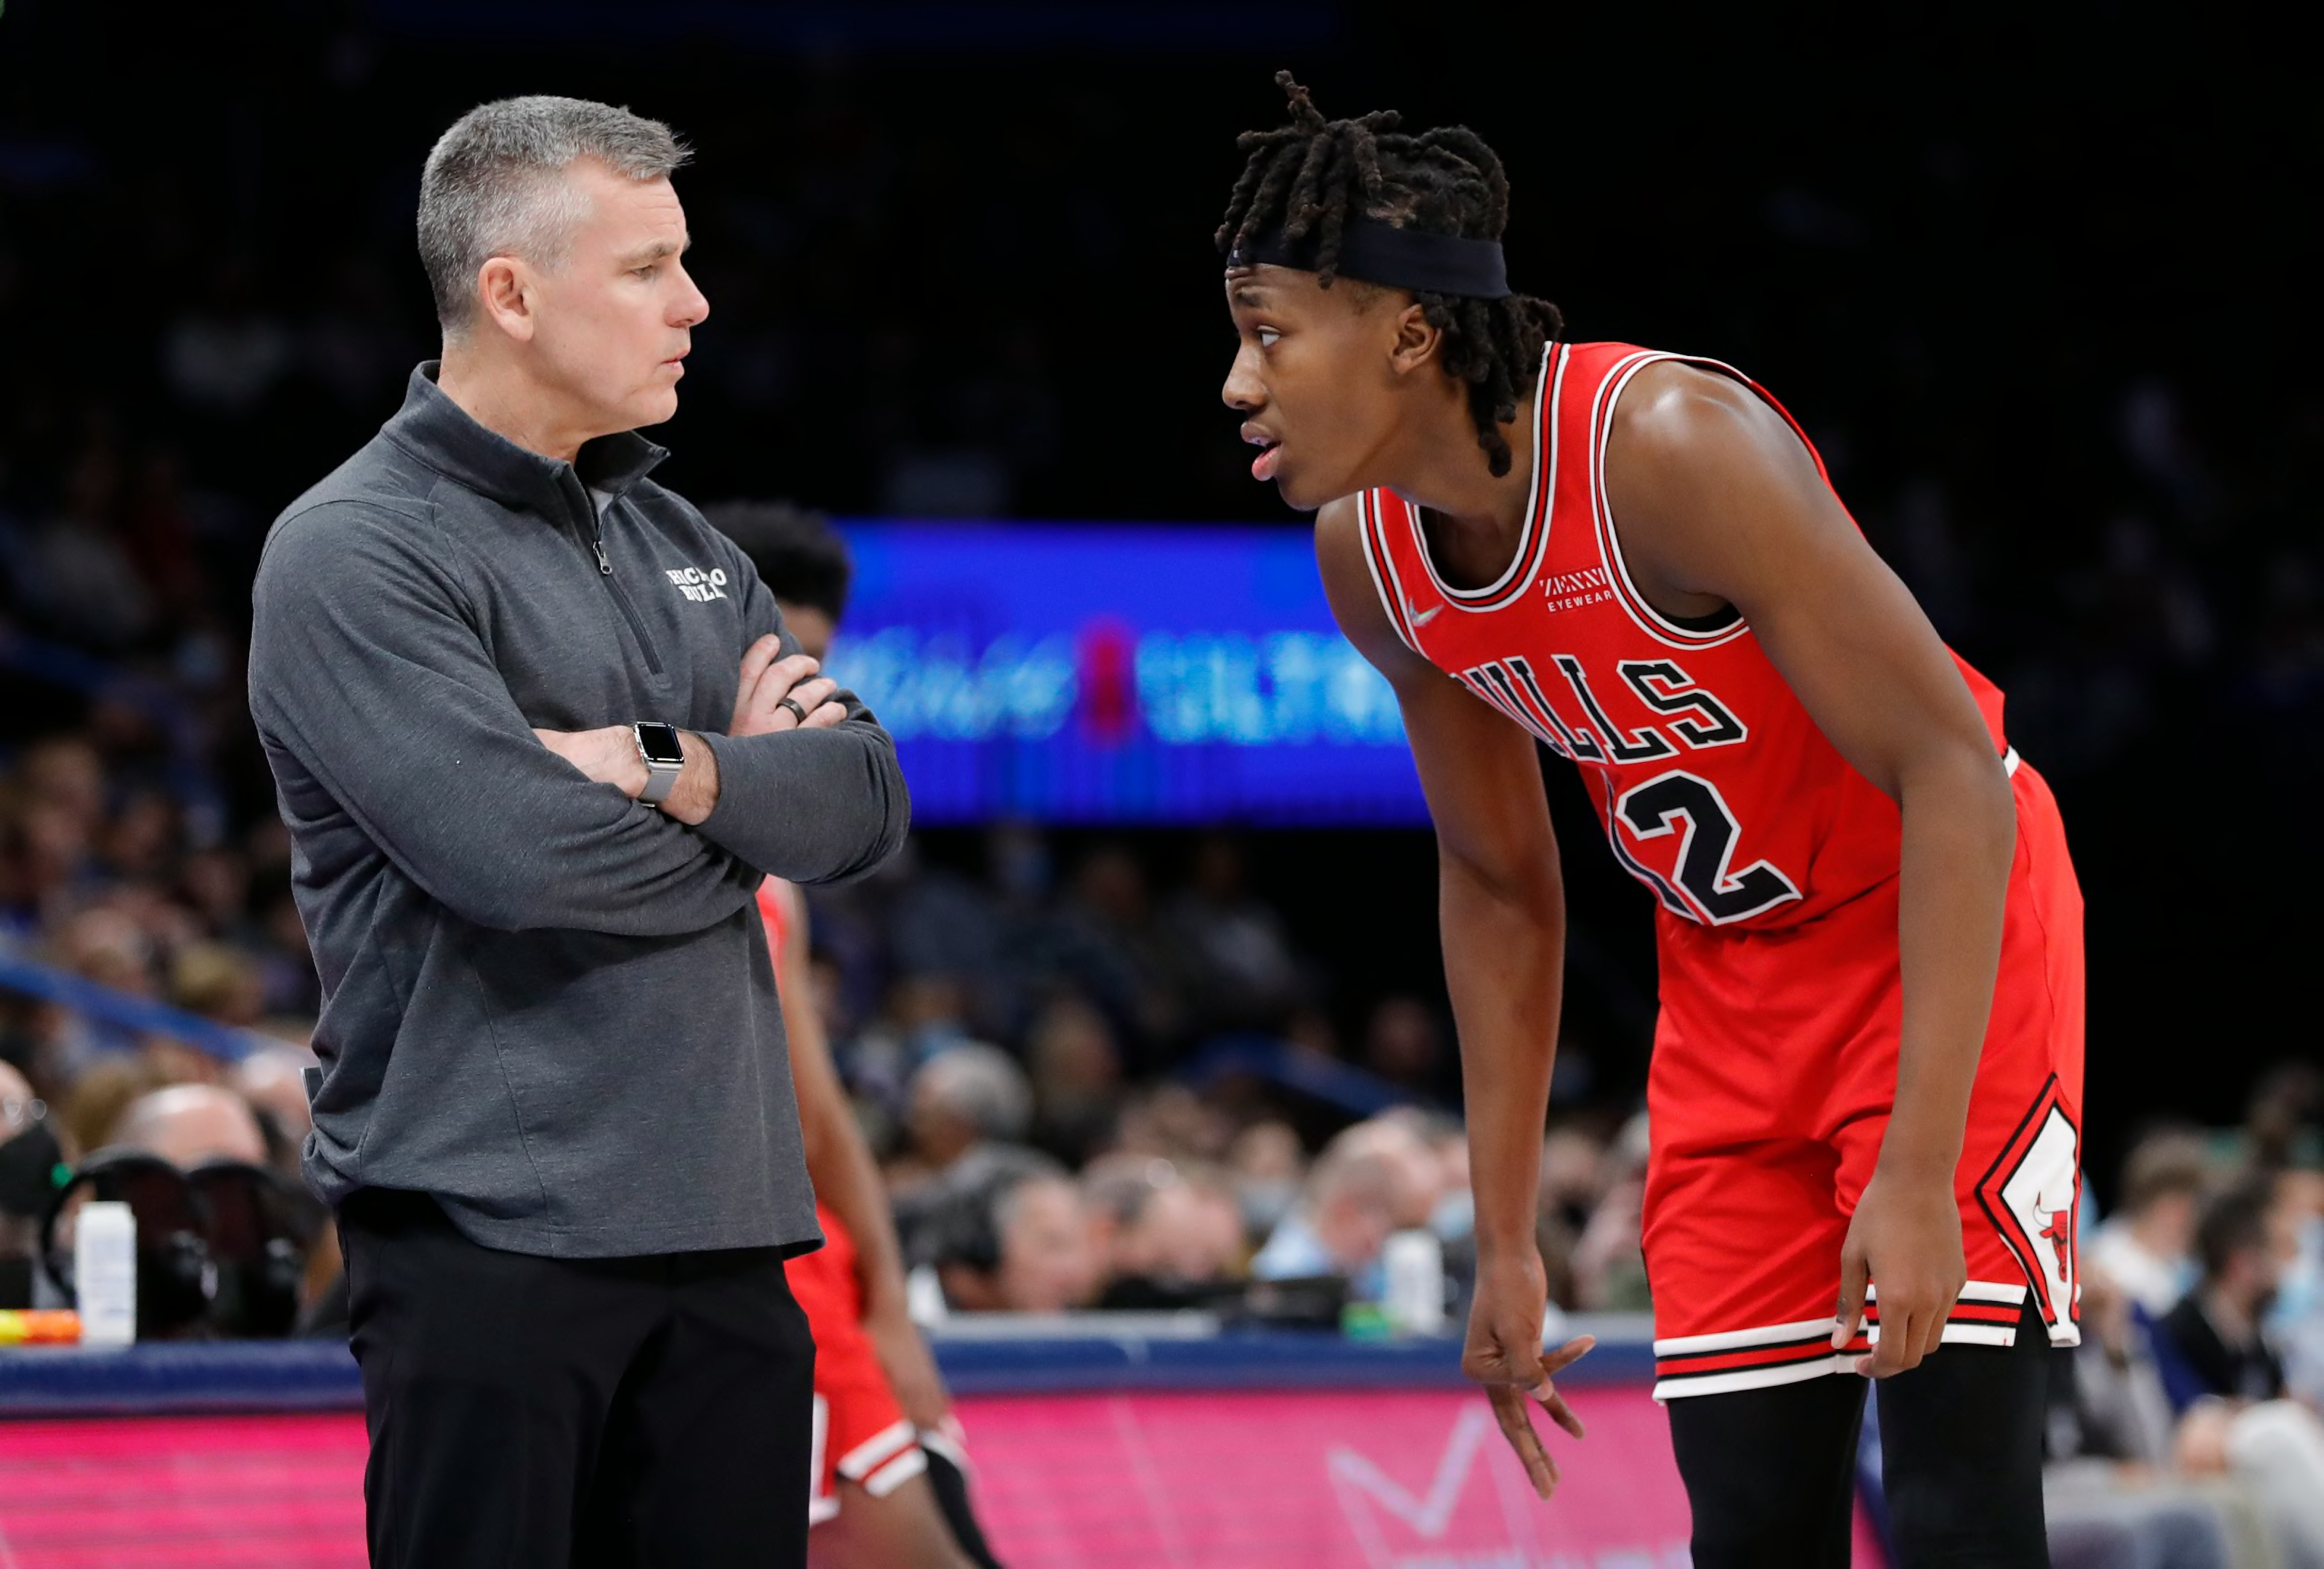 Bulls Rumors: Ayo Dosunmu Might Not Be Ready for Key Role